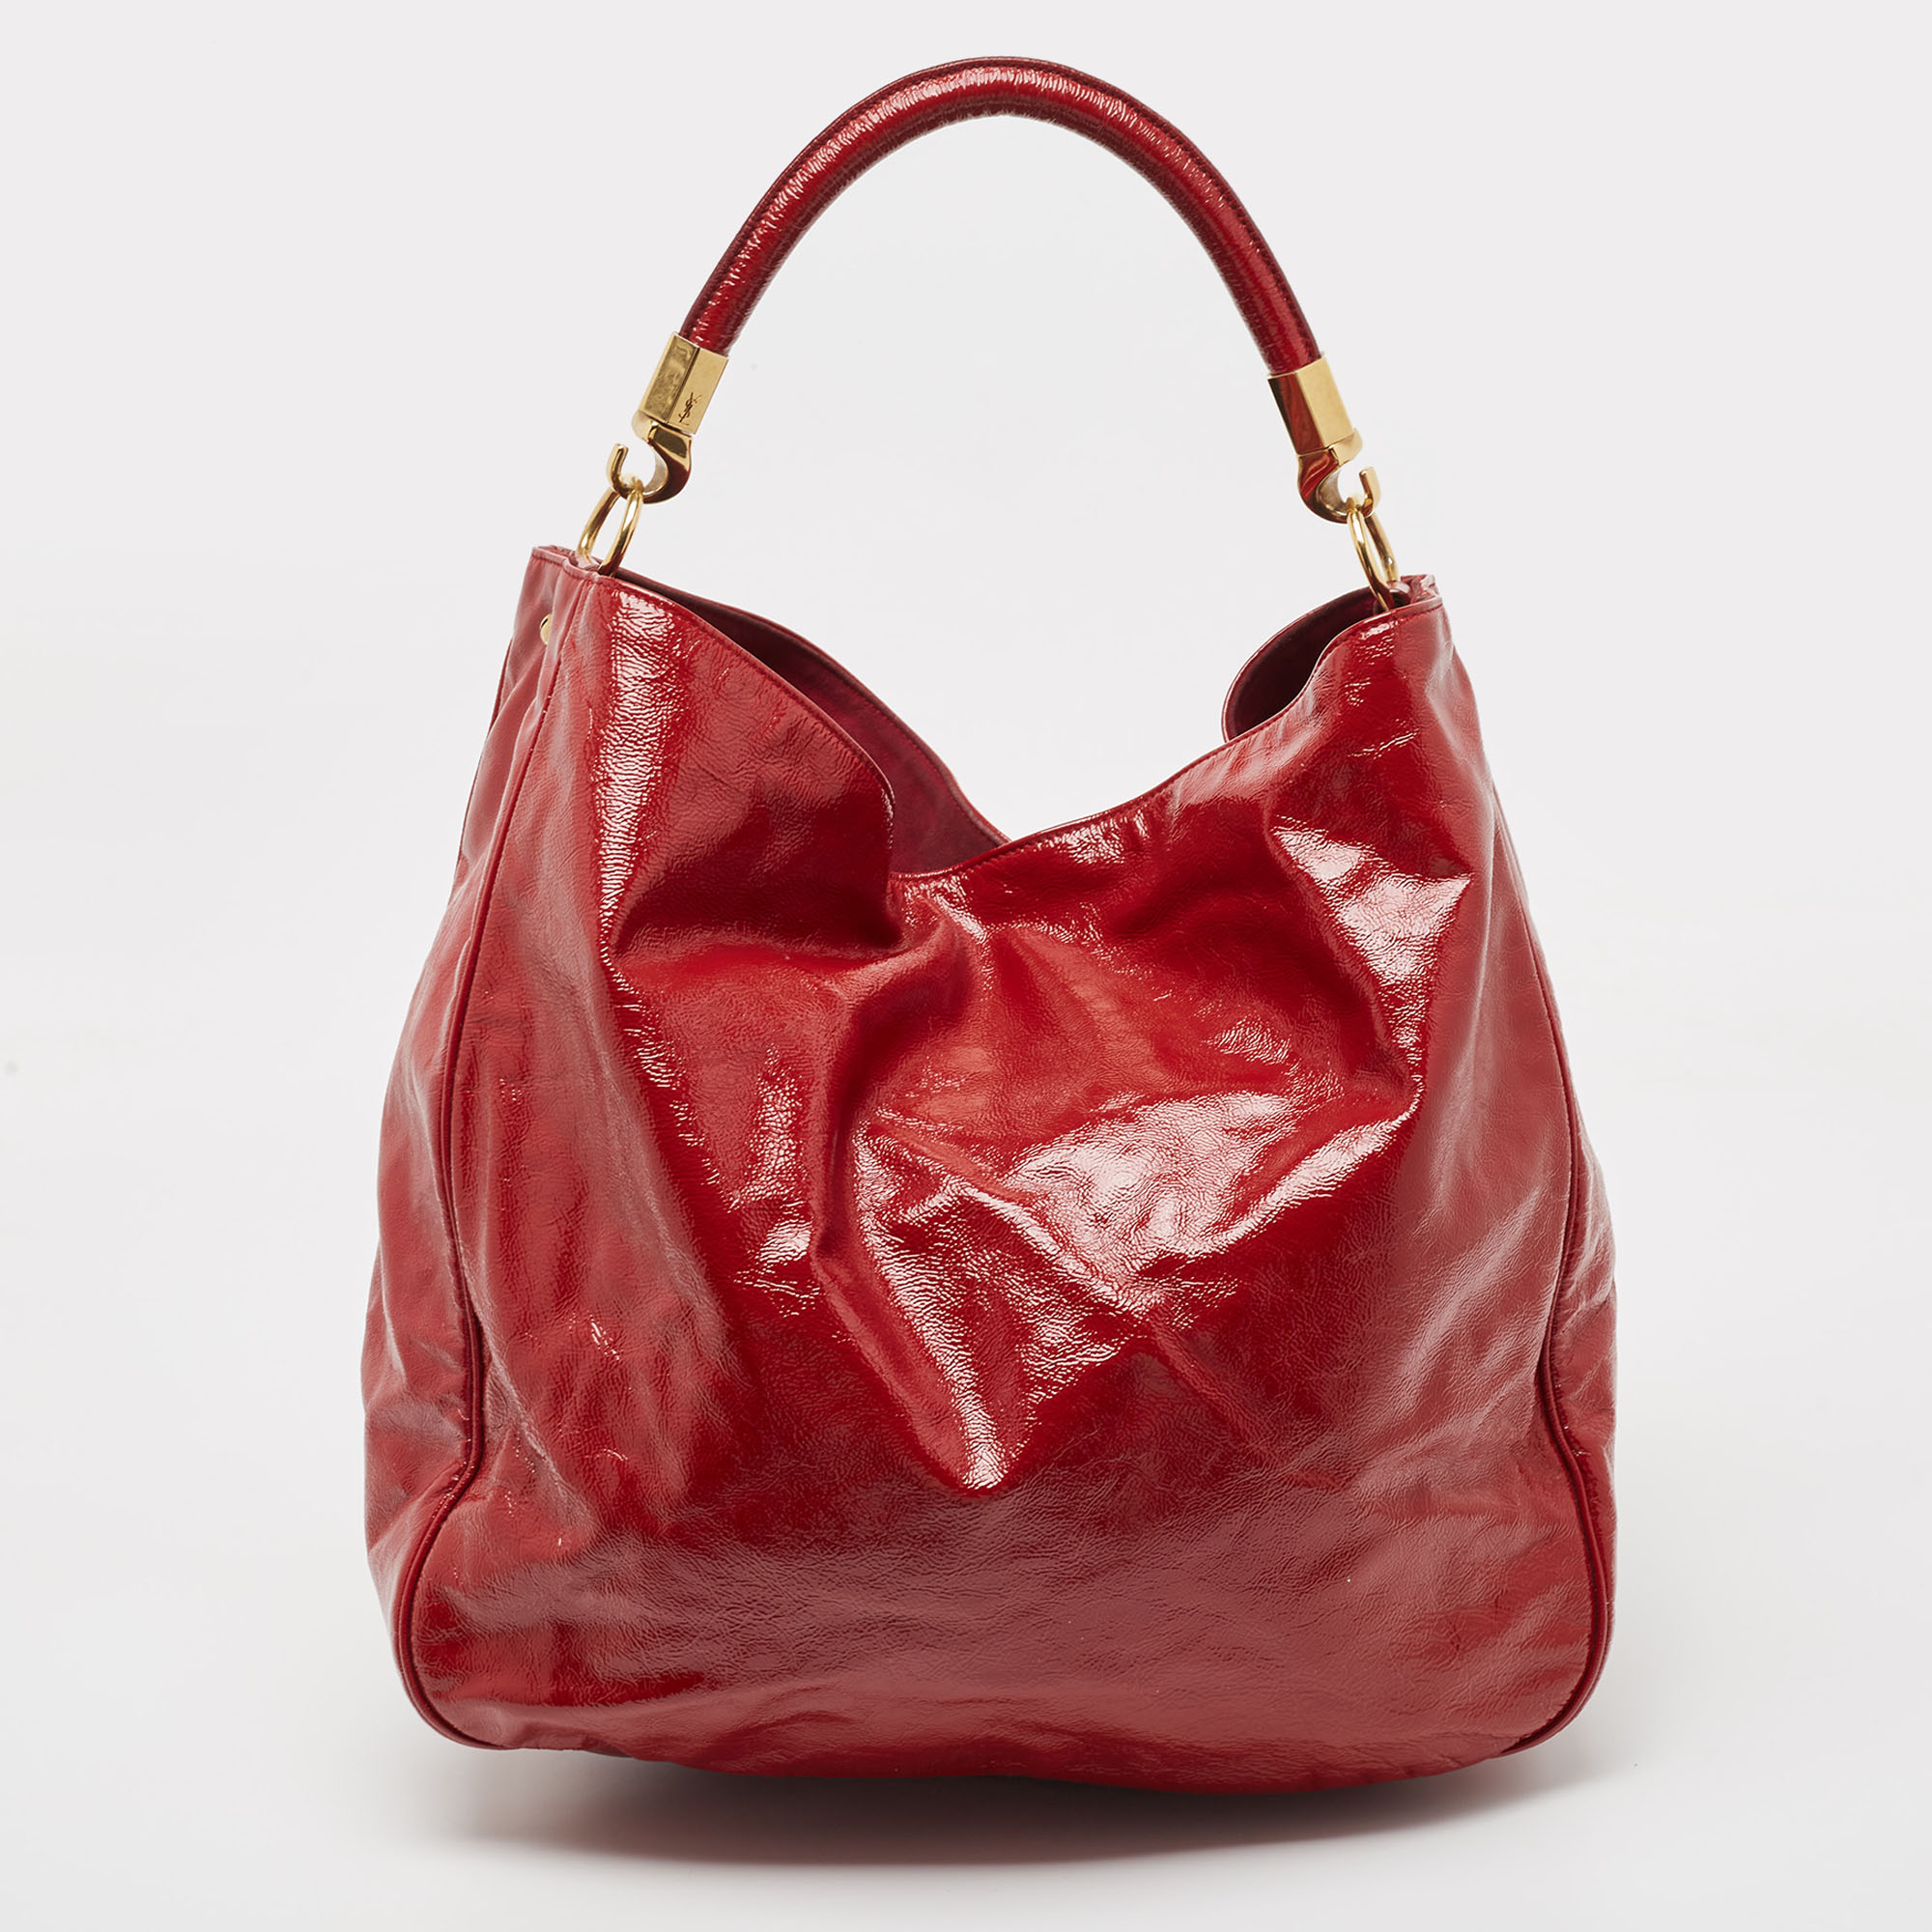 Yves Saint Laurent Red Patent Leather Roady Hobo